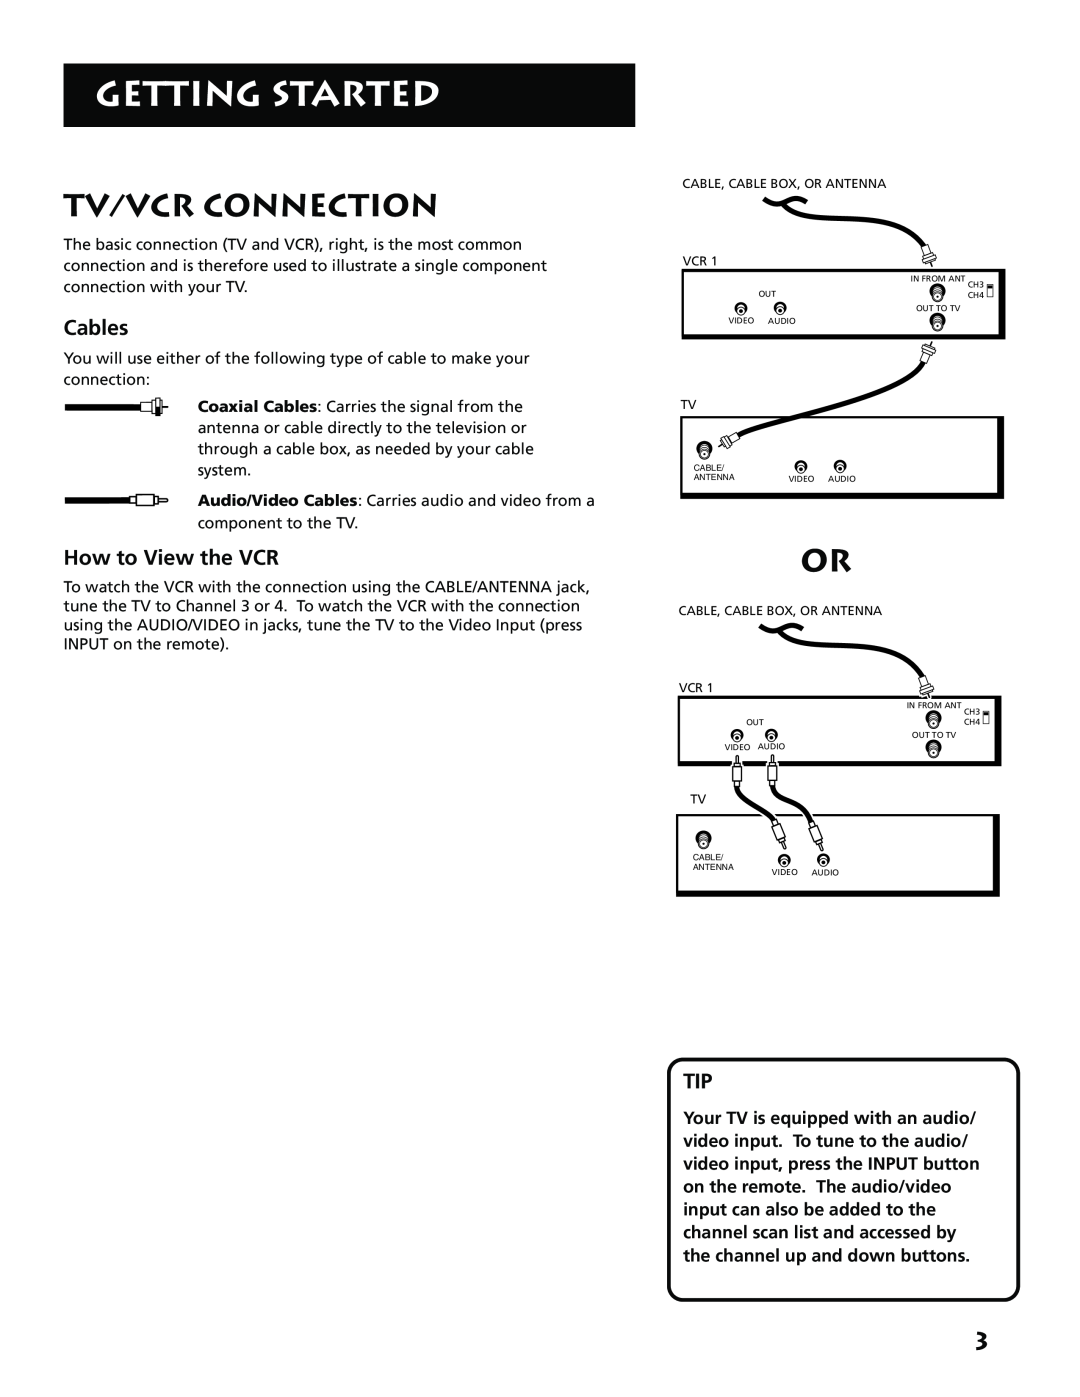 RCA E13341 manual Tv/Vcr Connection, Cables, How to View the VCR, Getting Started 